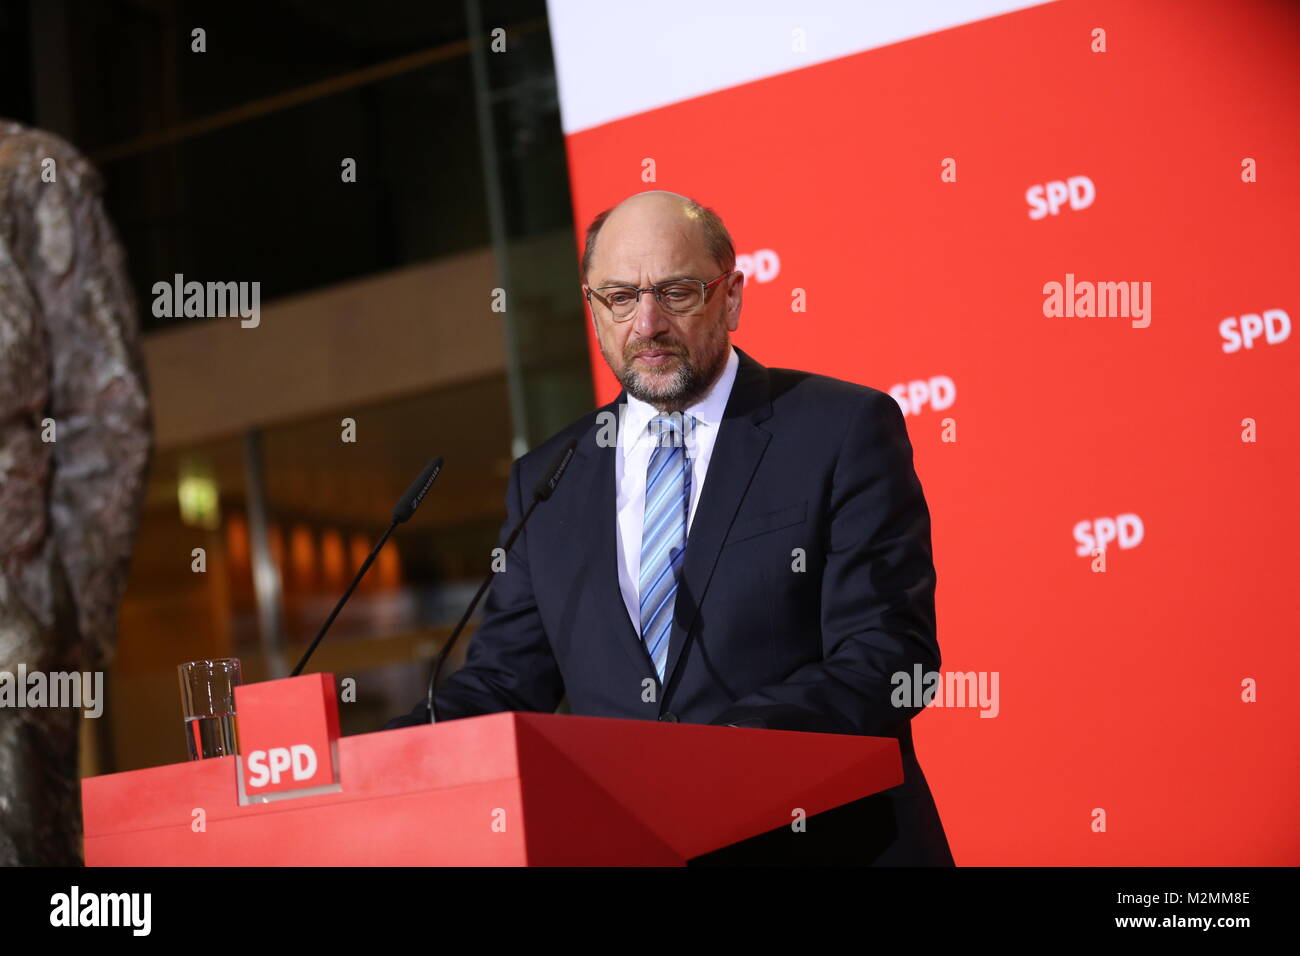 Berlin, Germany. 07th Feb, 2018. SPD leader Martin Schulz hands over the party chairmanship to parliamentary leader Andreas Nahles. Andrea Nahles would be the first woman at the head of the SPD party. A Credit: Simone Kuhlmey/Pacific Press/Alamy Live News Stock Photo